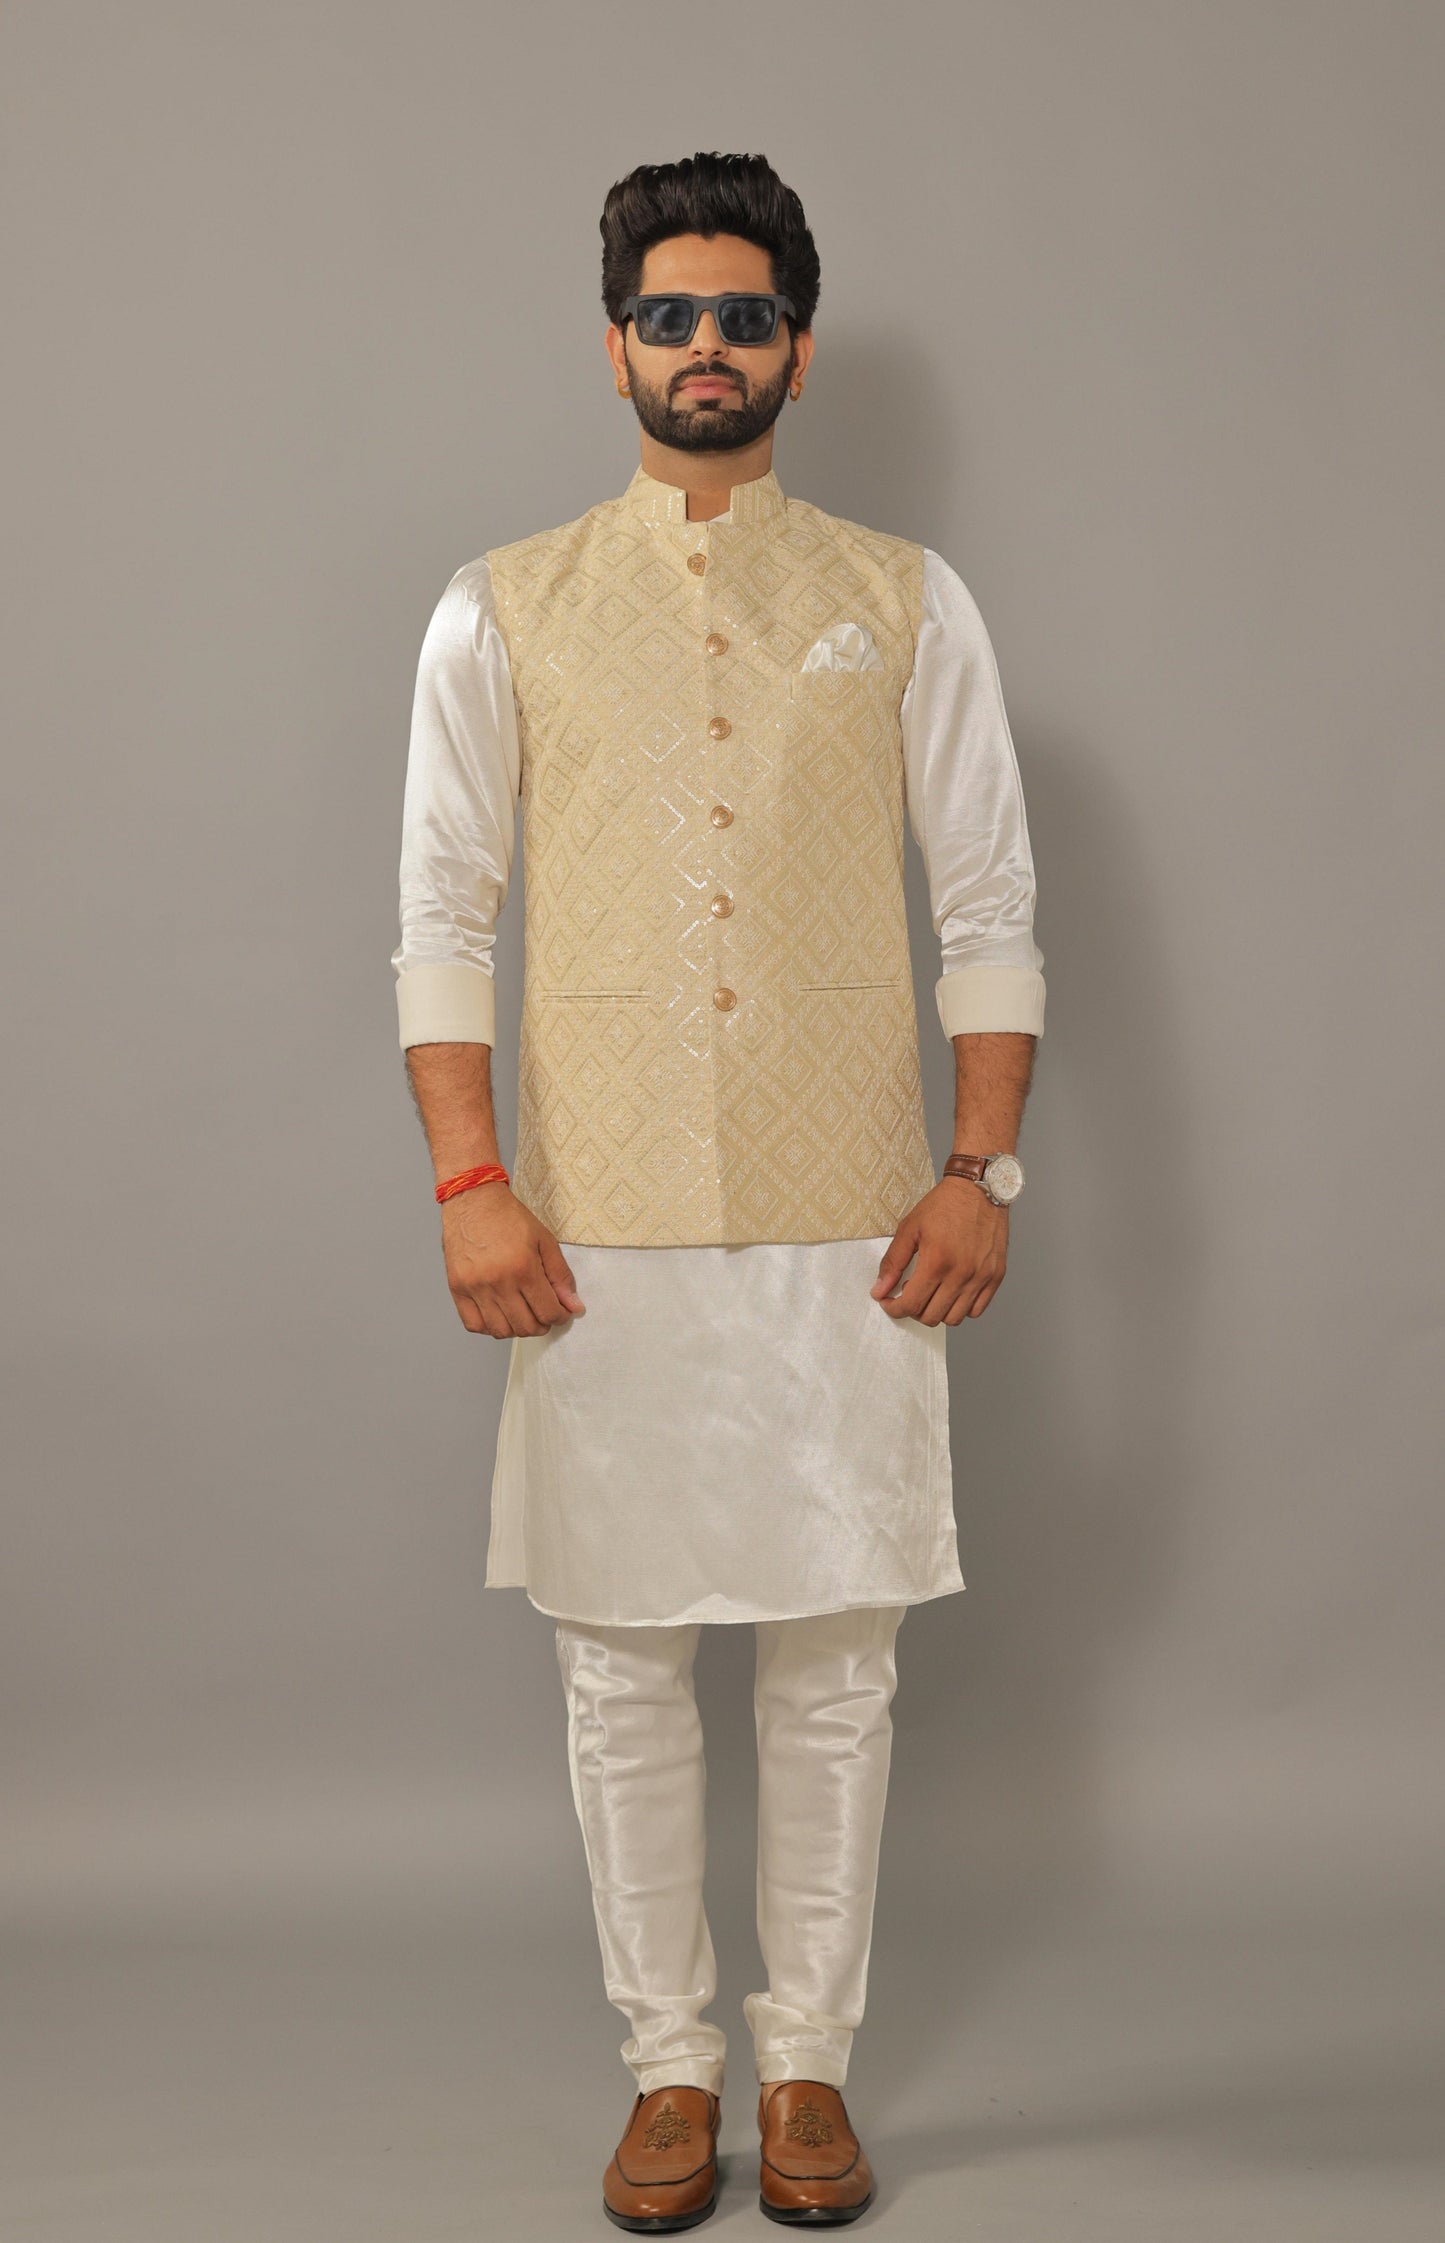 Off-White Kurta Pajama Set with Luckhnawi Embroidery Beige Color Nehru Jacket - Handcrafted